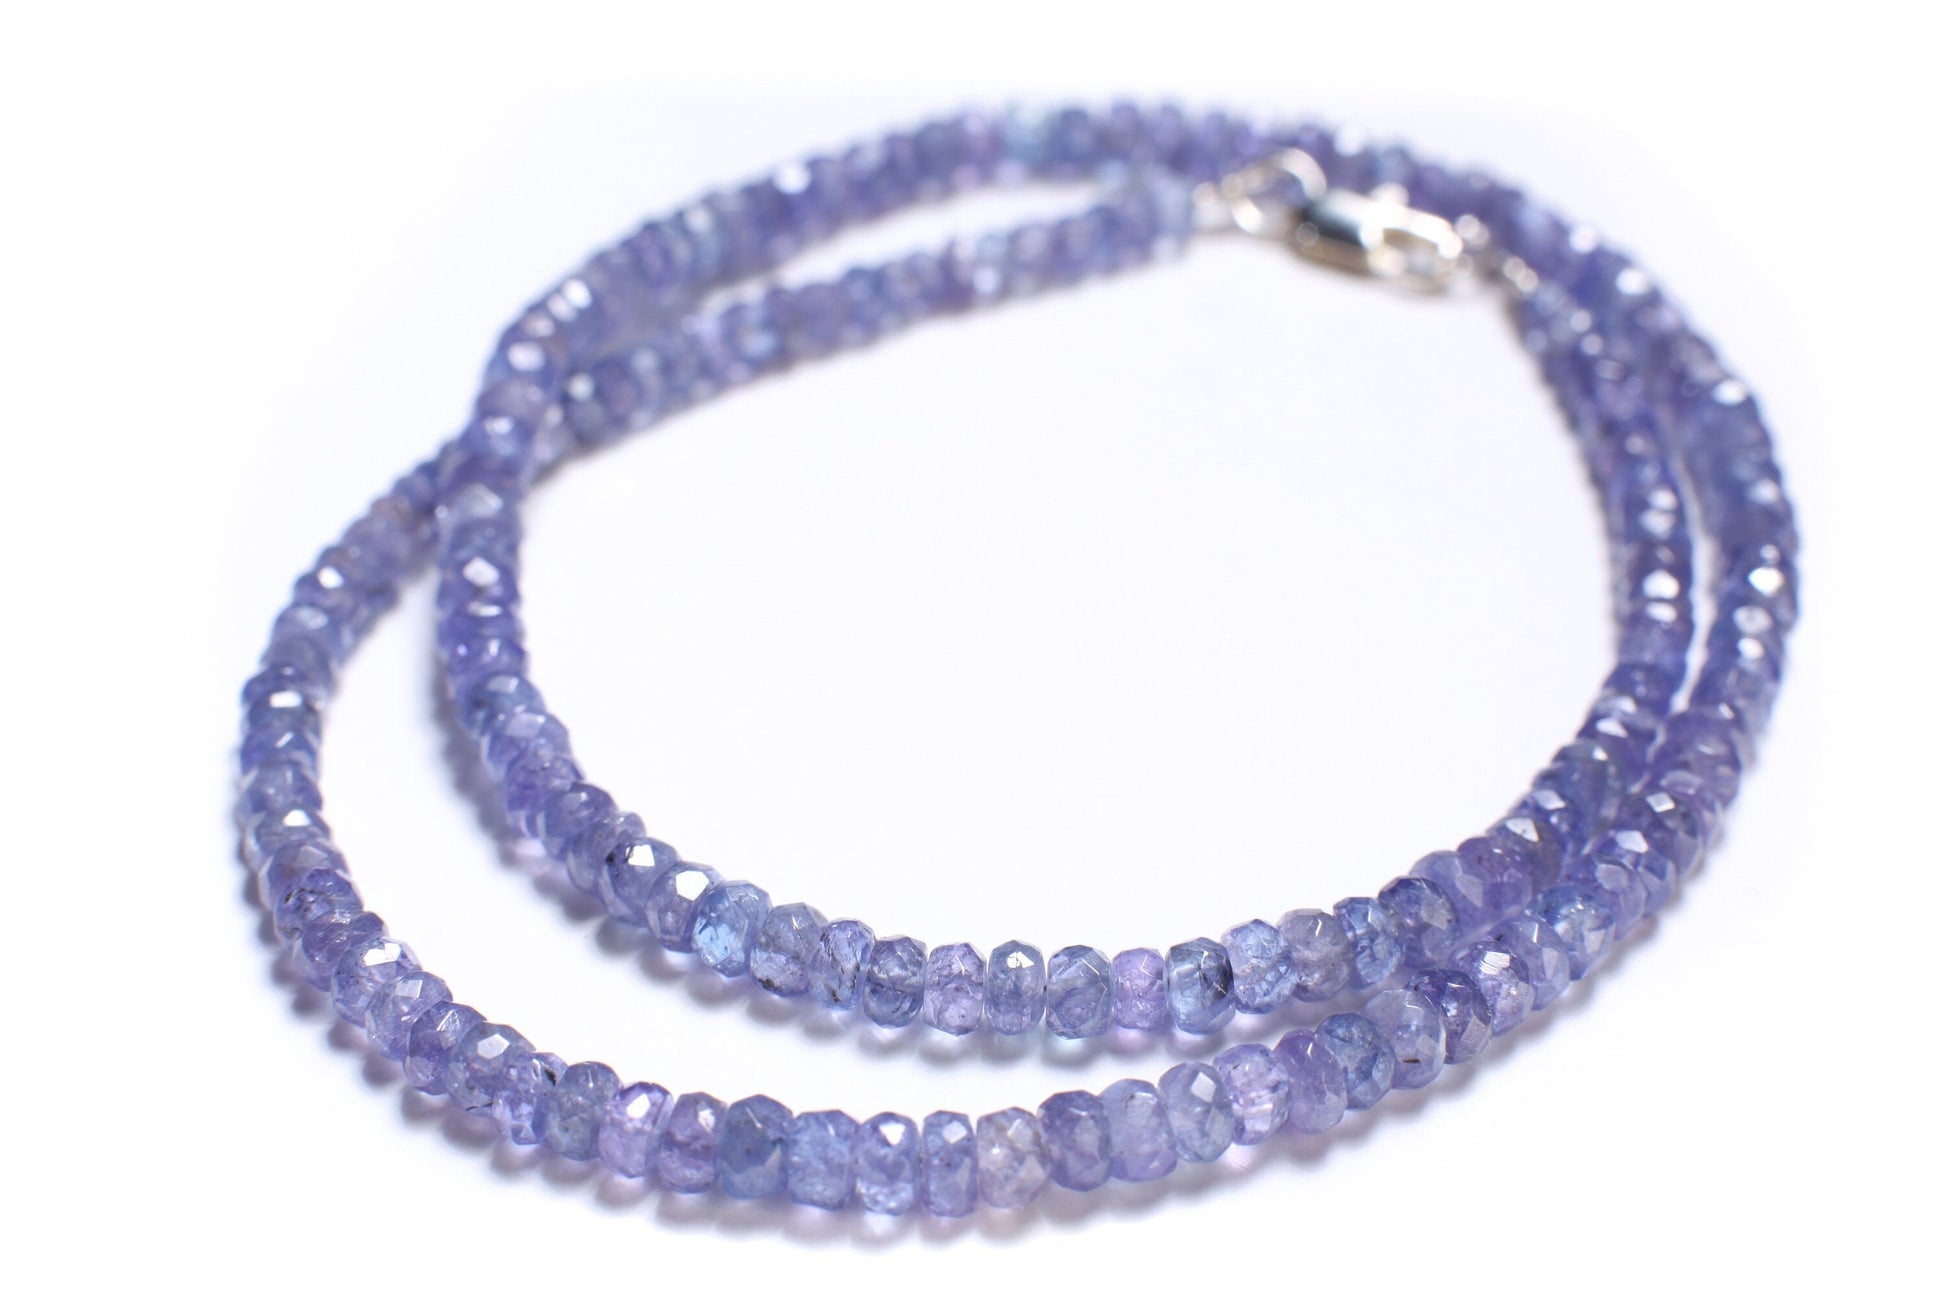 Tanzanite Faceted 4mm Rondelle Choker Necklace in 925 Sterling Silver, Gold Filled, Birthday, Natural Healing Energy Chakra Man, Woman gifts